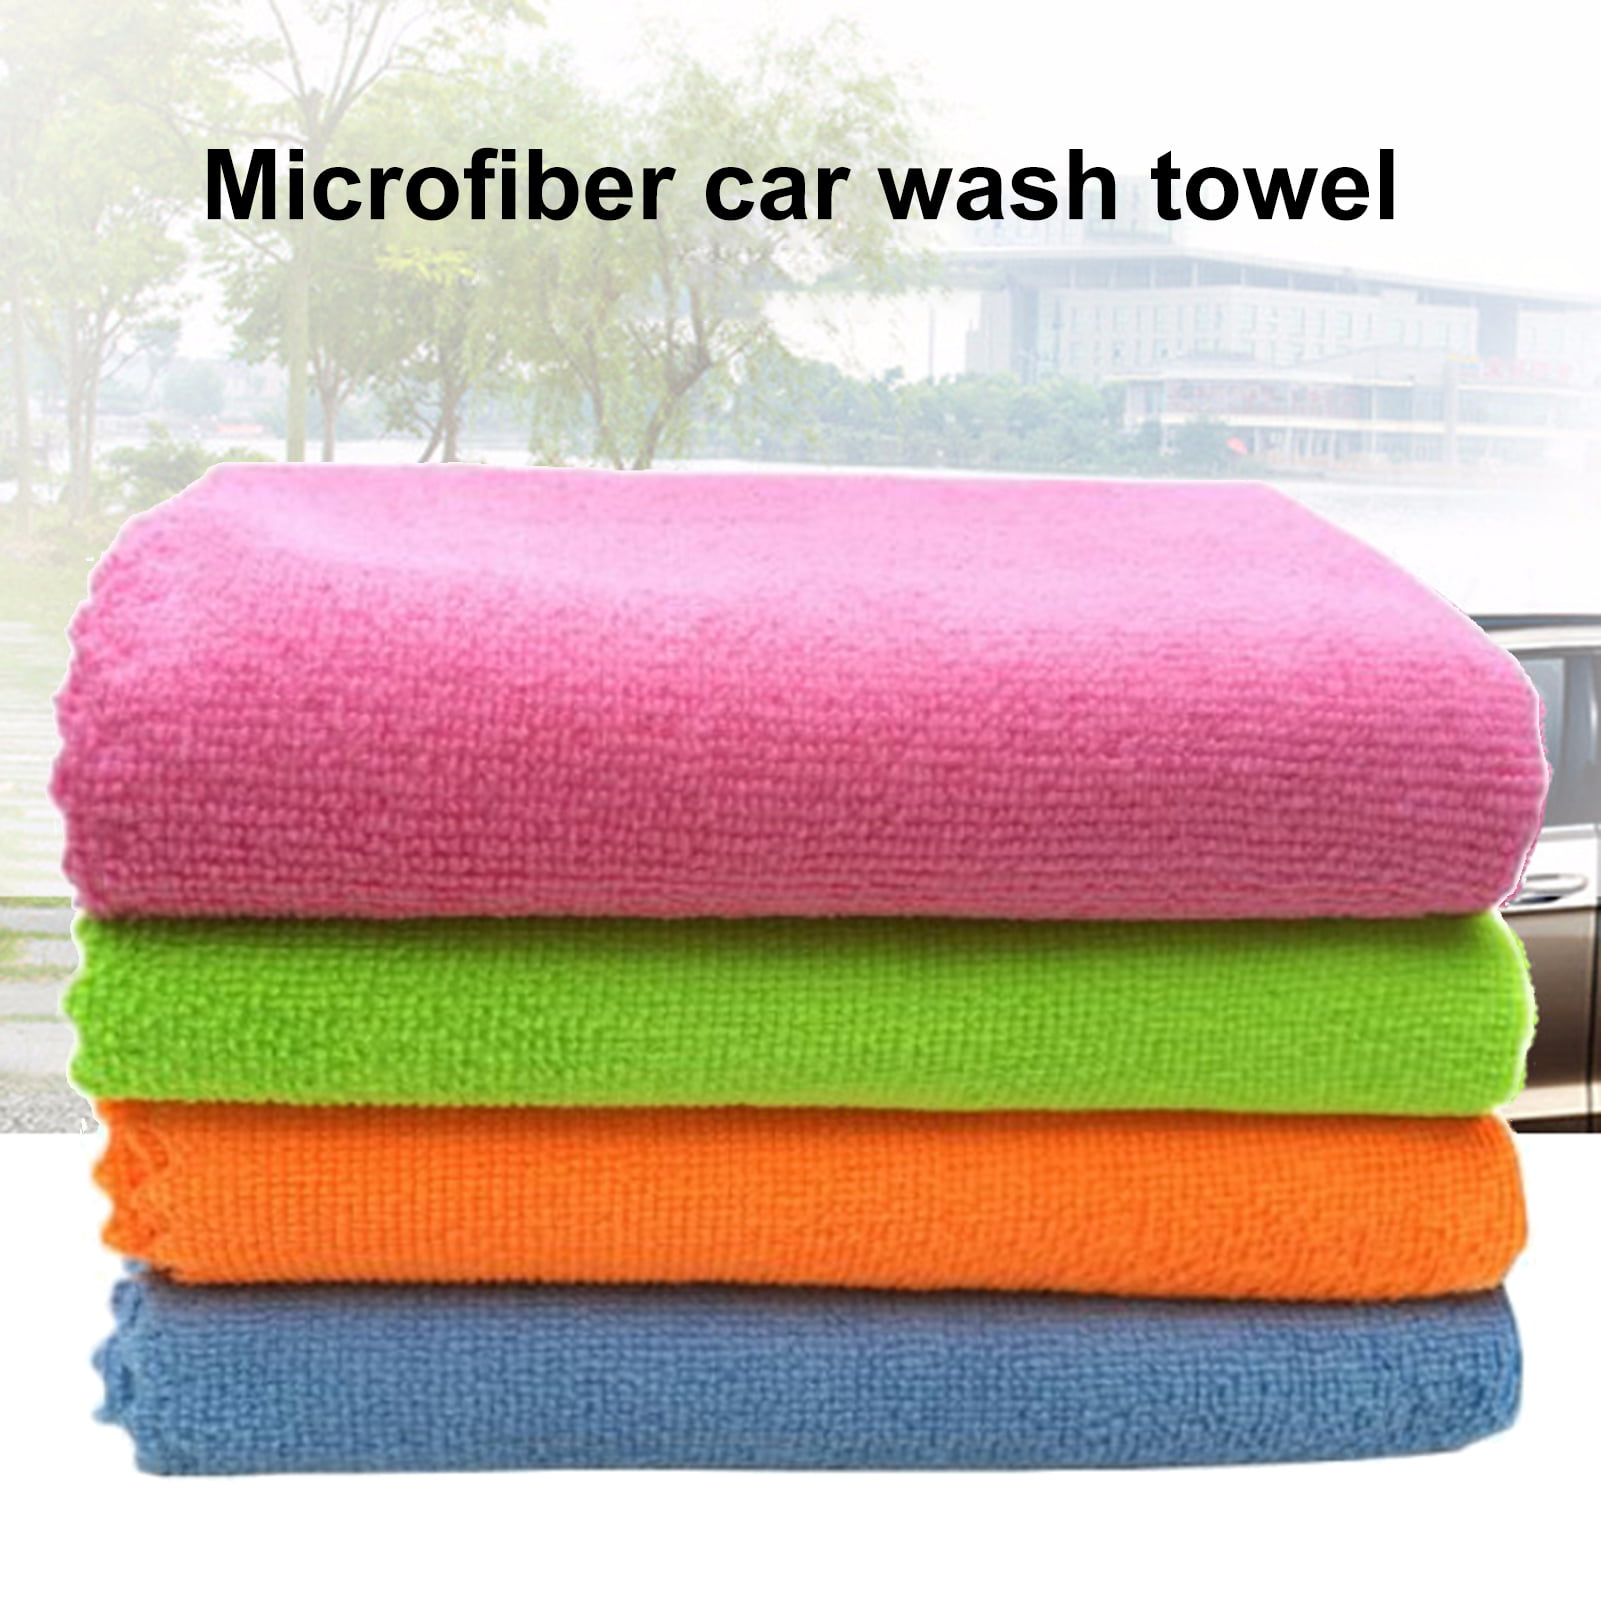 1x Higher Quality Thicken Microfiber Cleaning towel Car Wash Clean Cloth 30x70cm